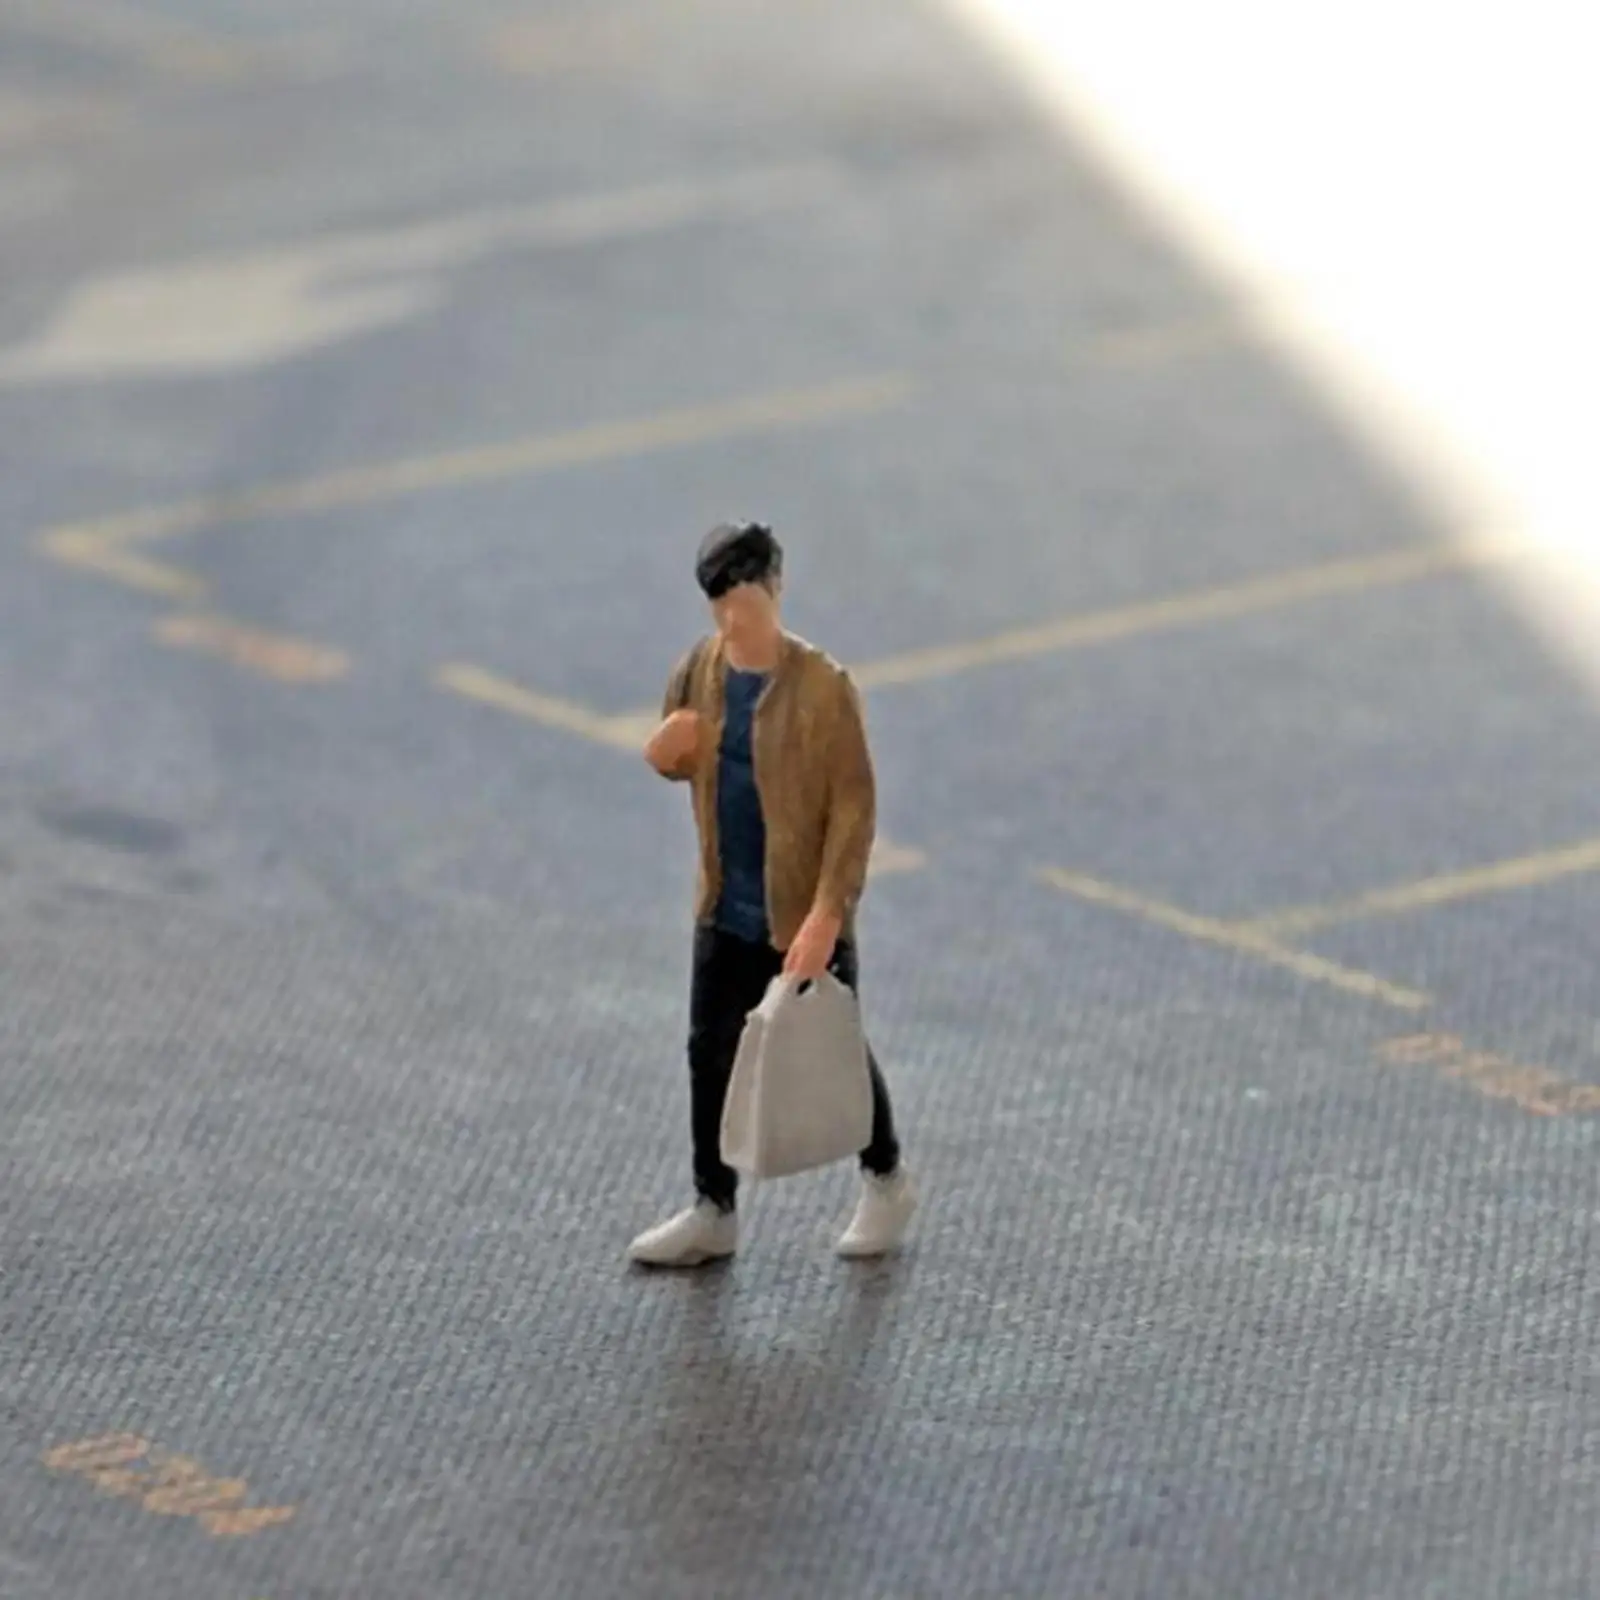 Simulation Diorama Street Character Figure Collectibles Desk Decoration Tiny People Model with for Diorama Miniature Scene Decor